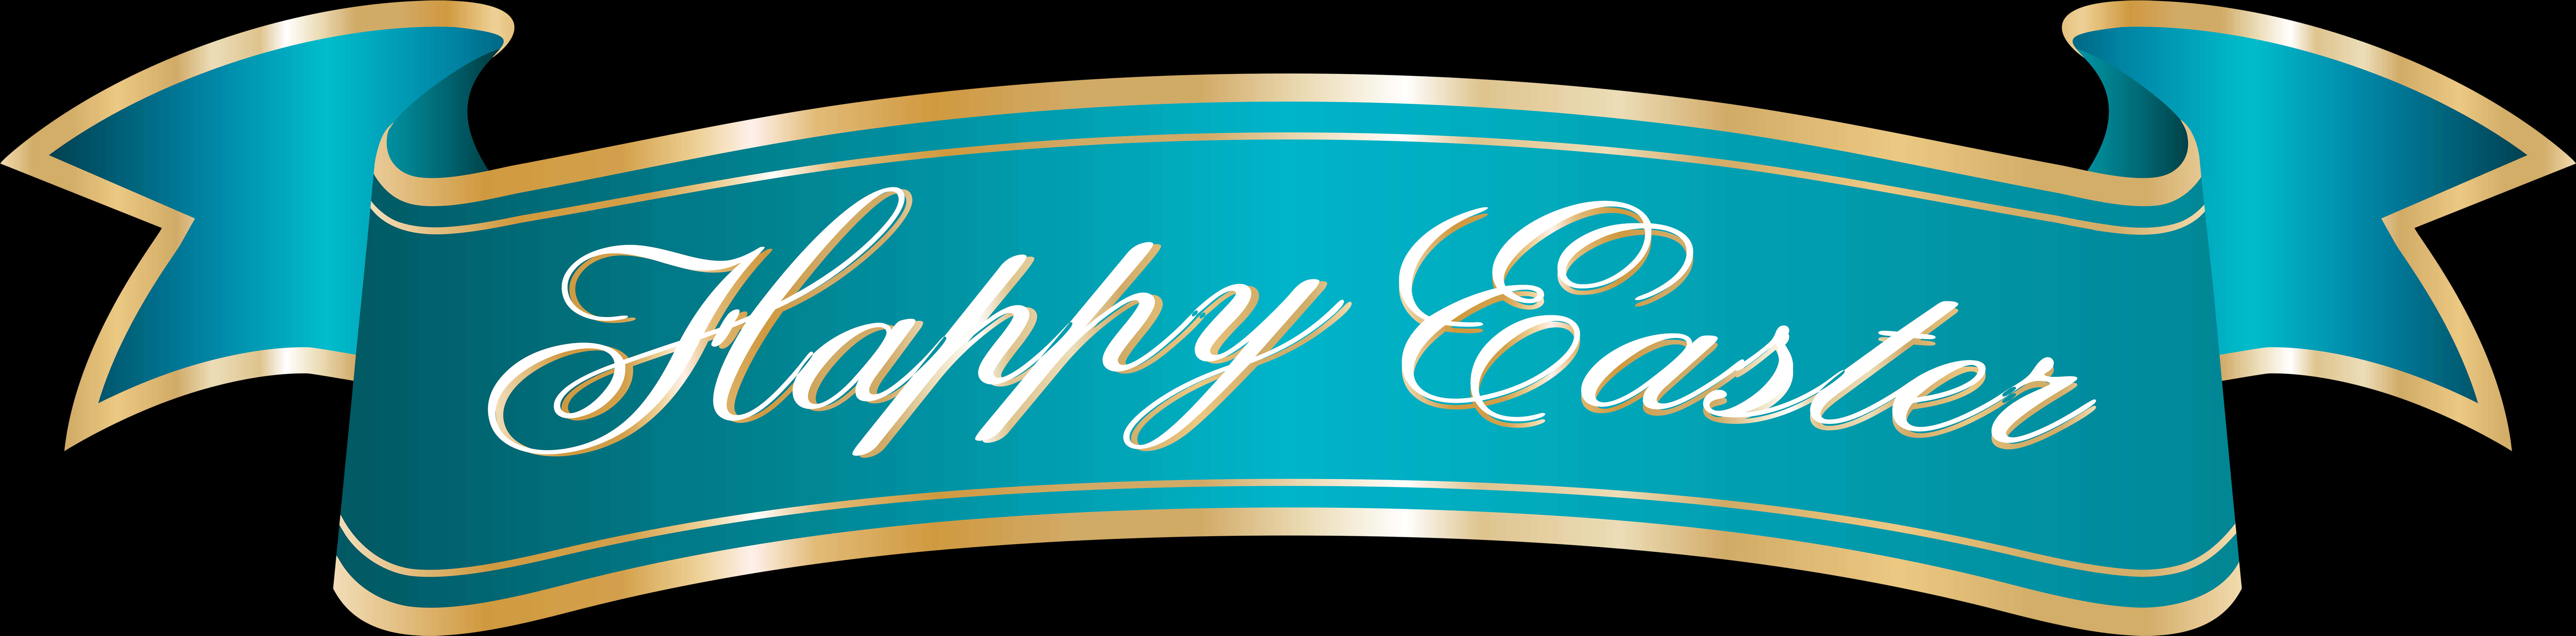 Happy Easter Banner Graphic